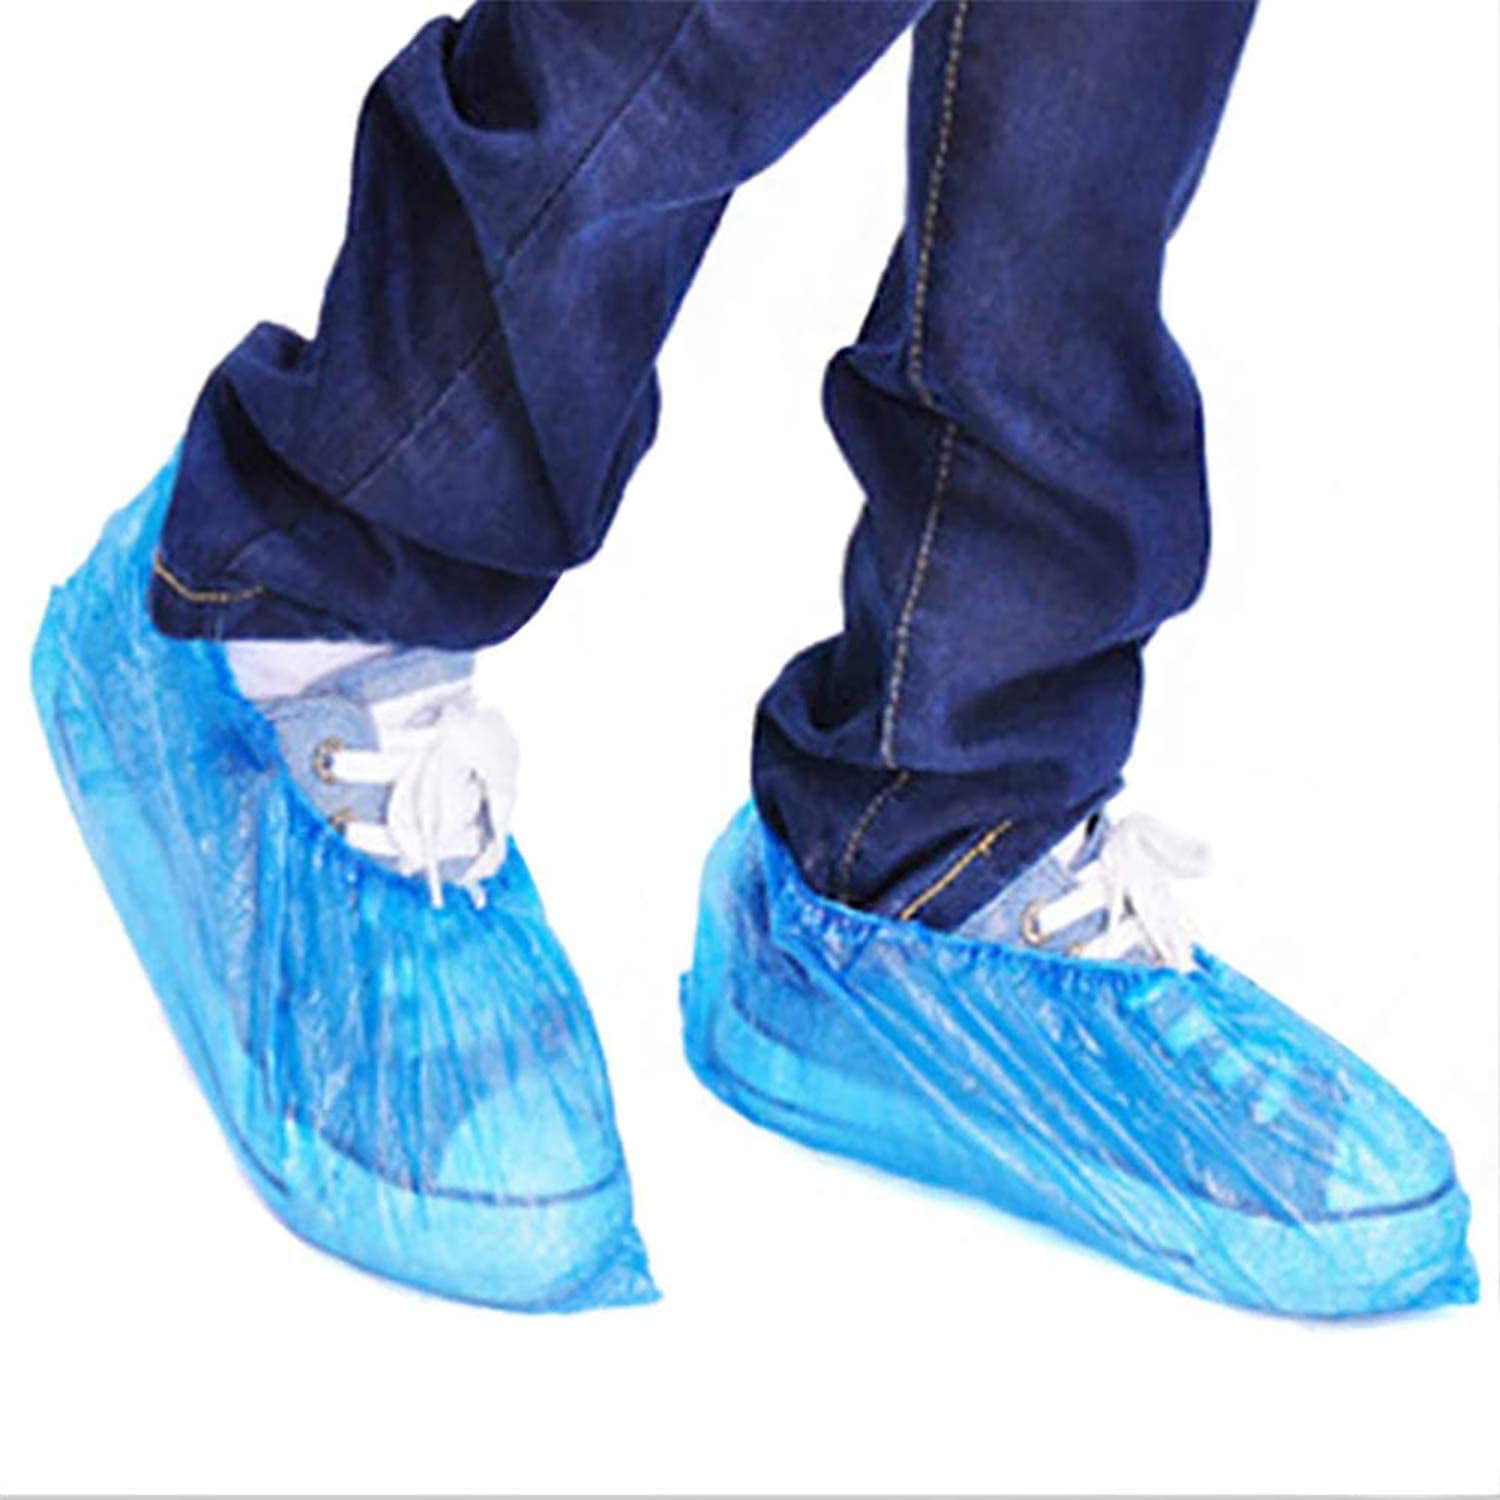 Details about   500 PCS Medical Waterproof Boot Covers Plastic Disposable Shoe Covers Overshoe Z 